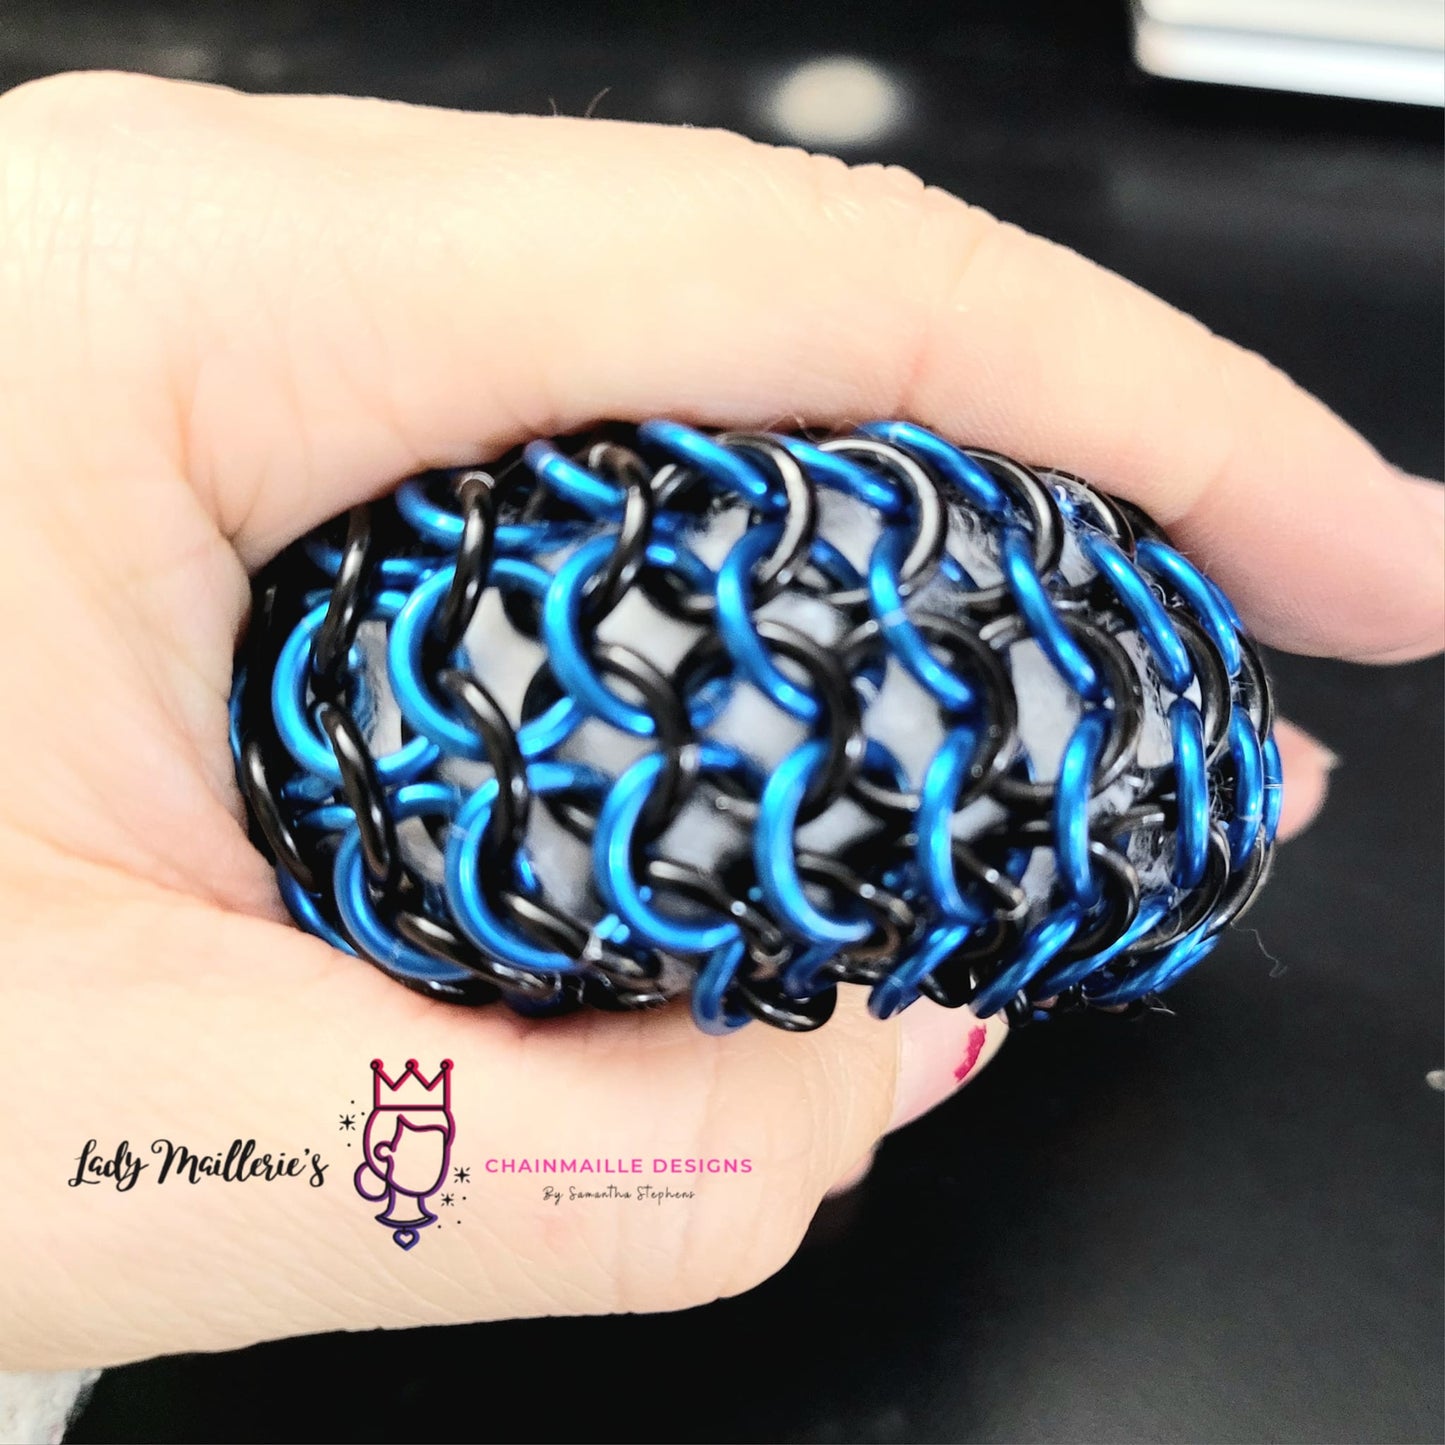 Chainmaille Hacky Sack/ Stress ball